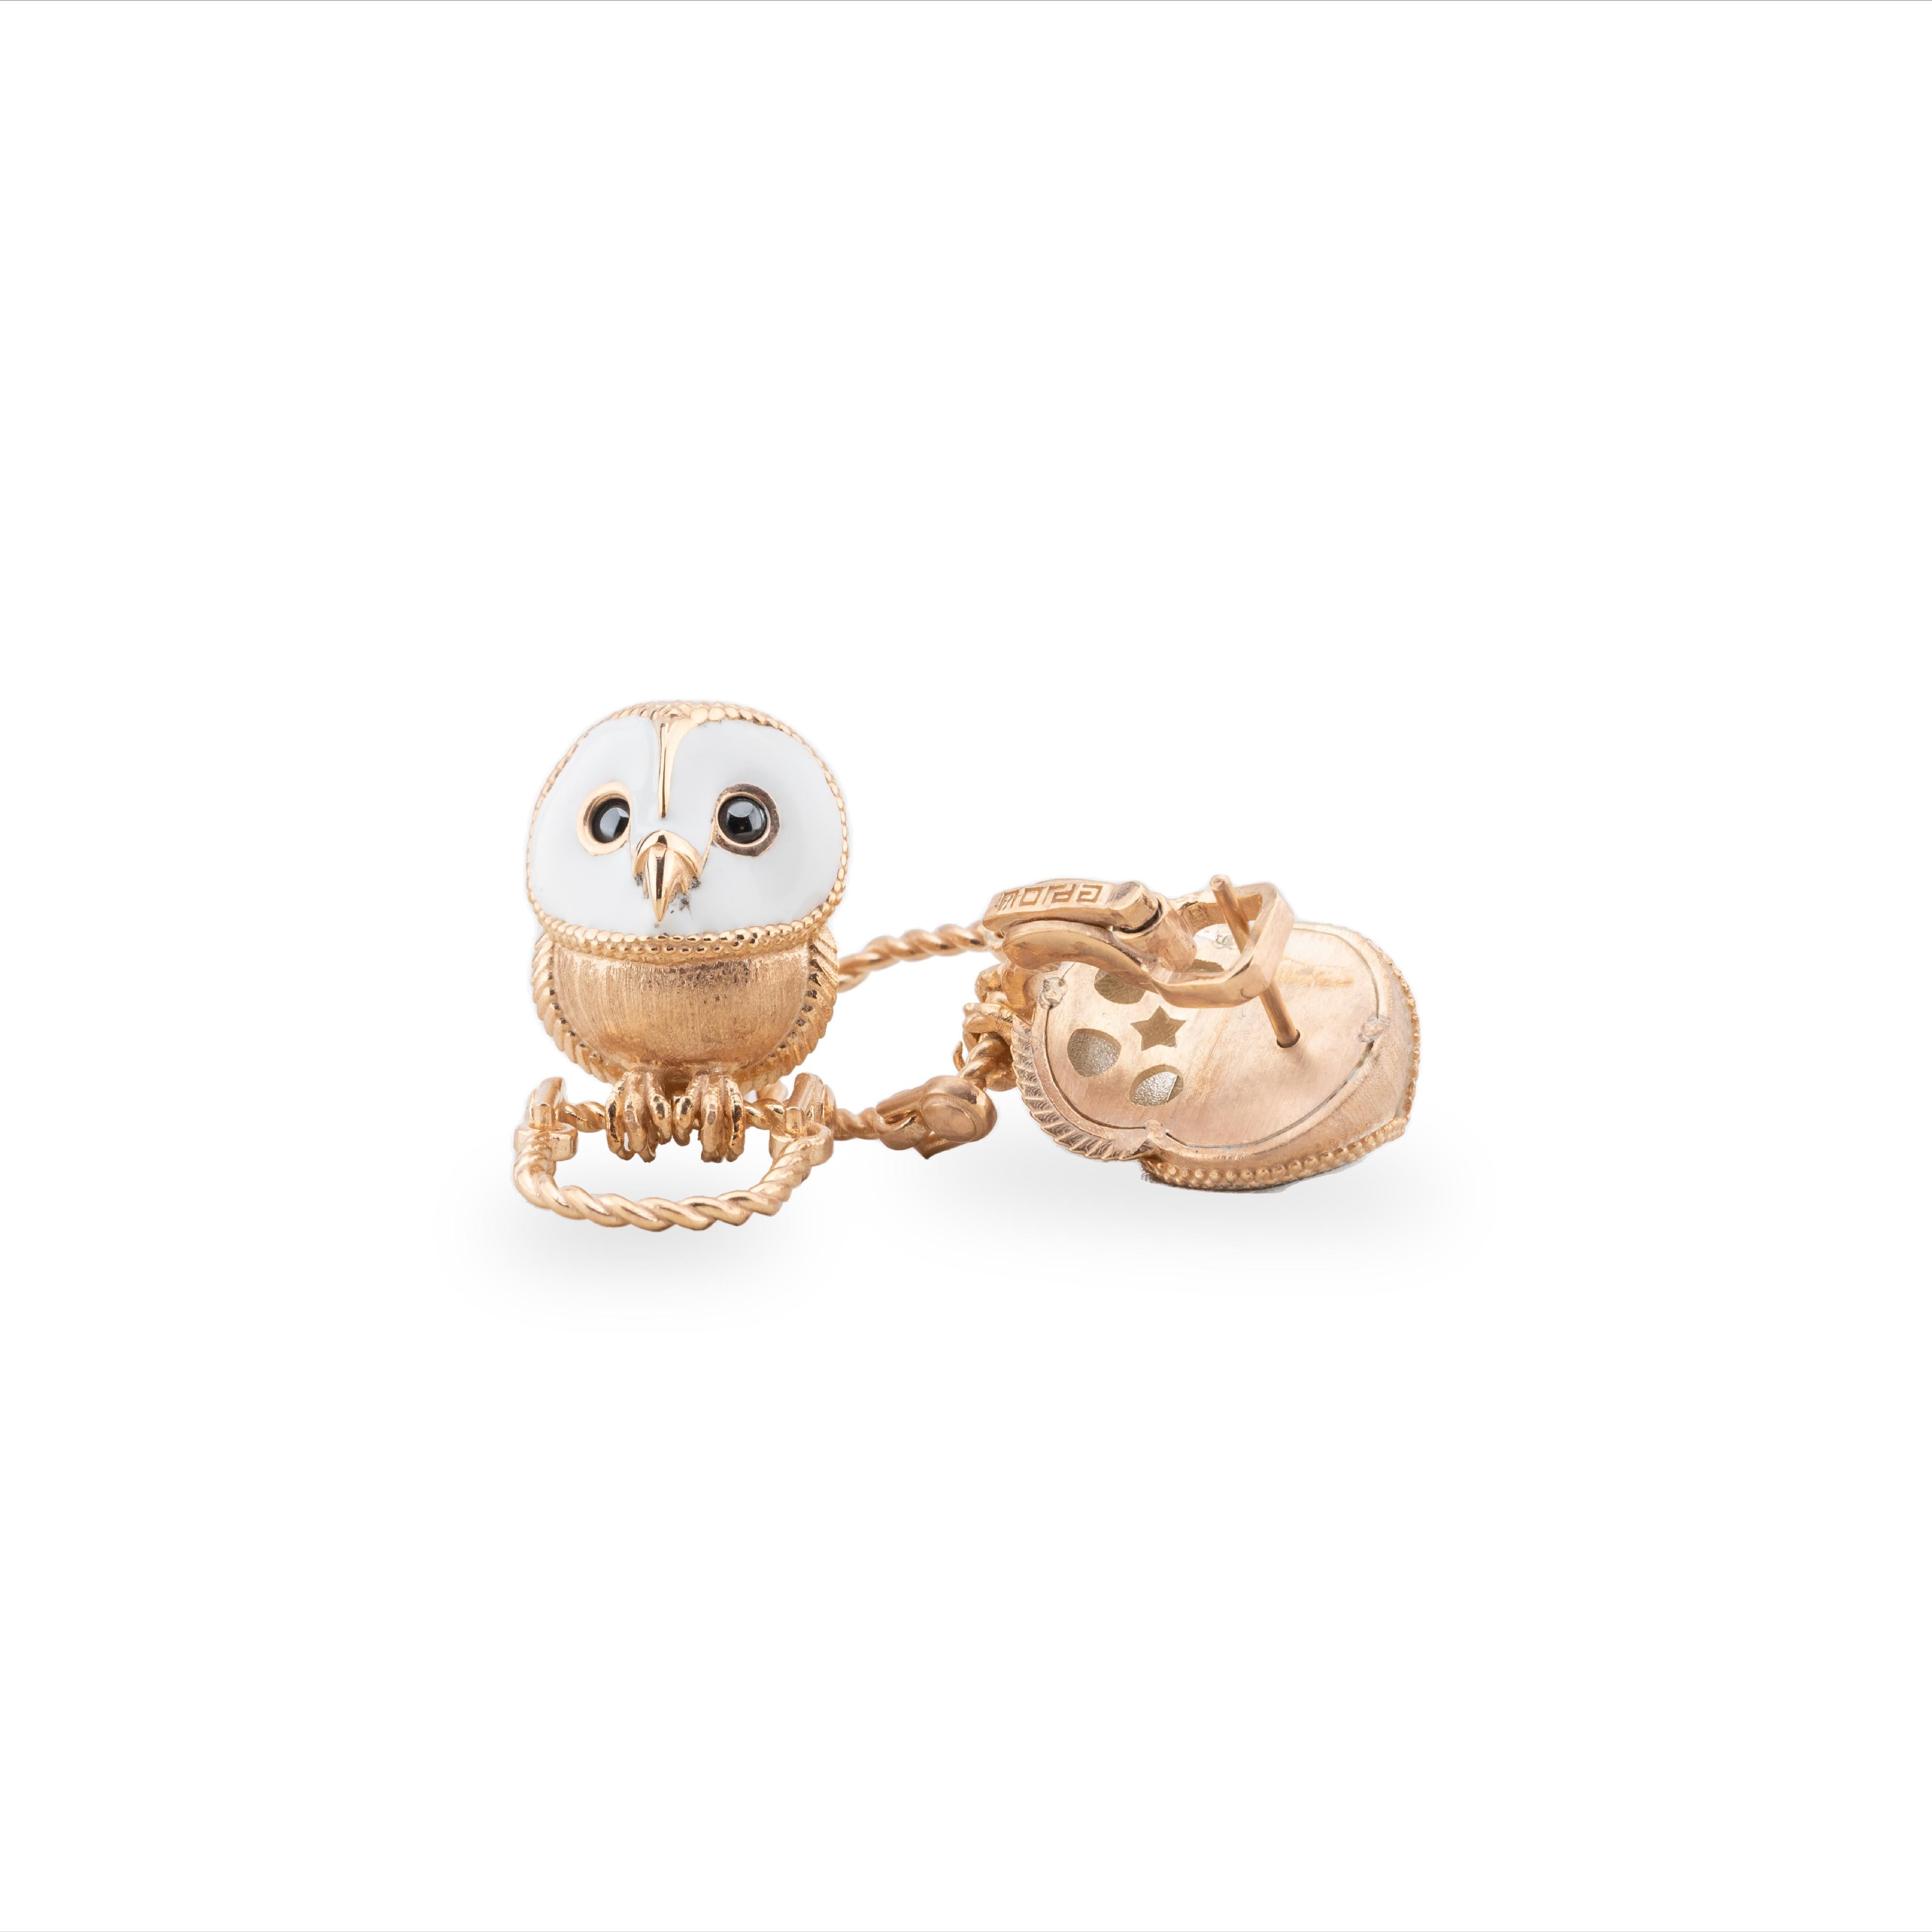 Barn owl is known for its distinctive heart-shaped face and silent flight, making it a beloved symbol of wisdom and mystery. These earrings capture the essence of the barn owl with their intricate design and attention to detail. The combination of